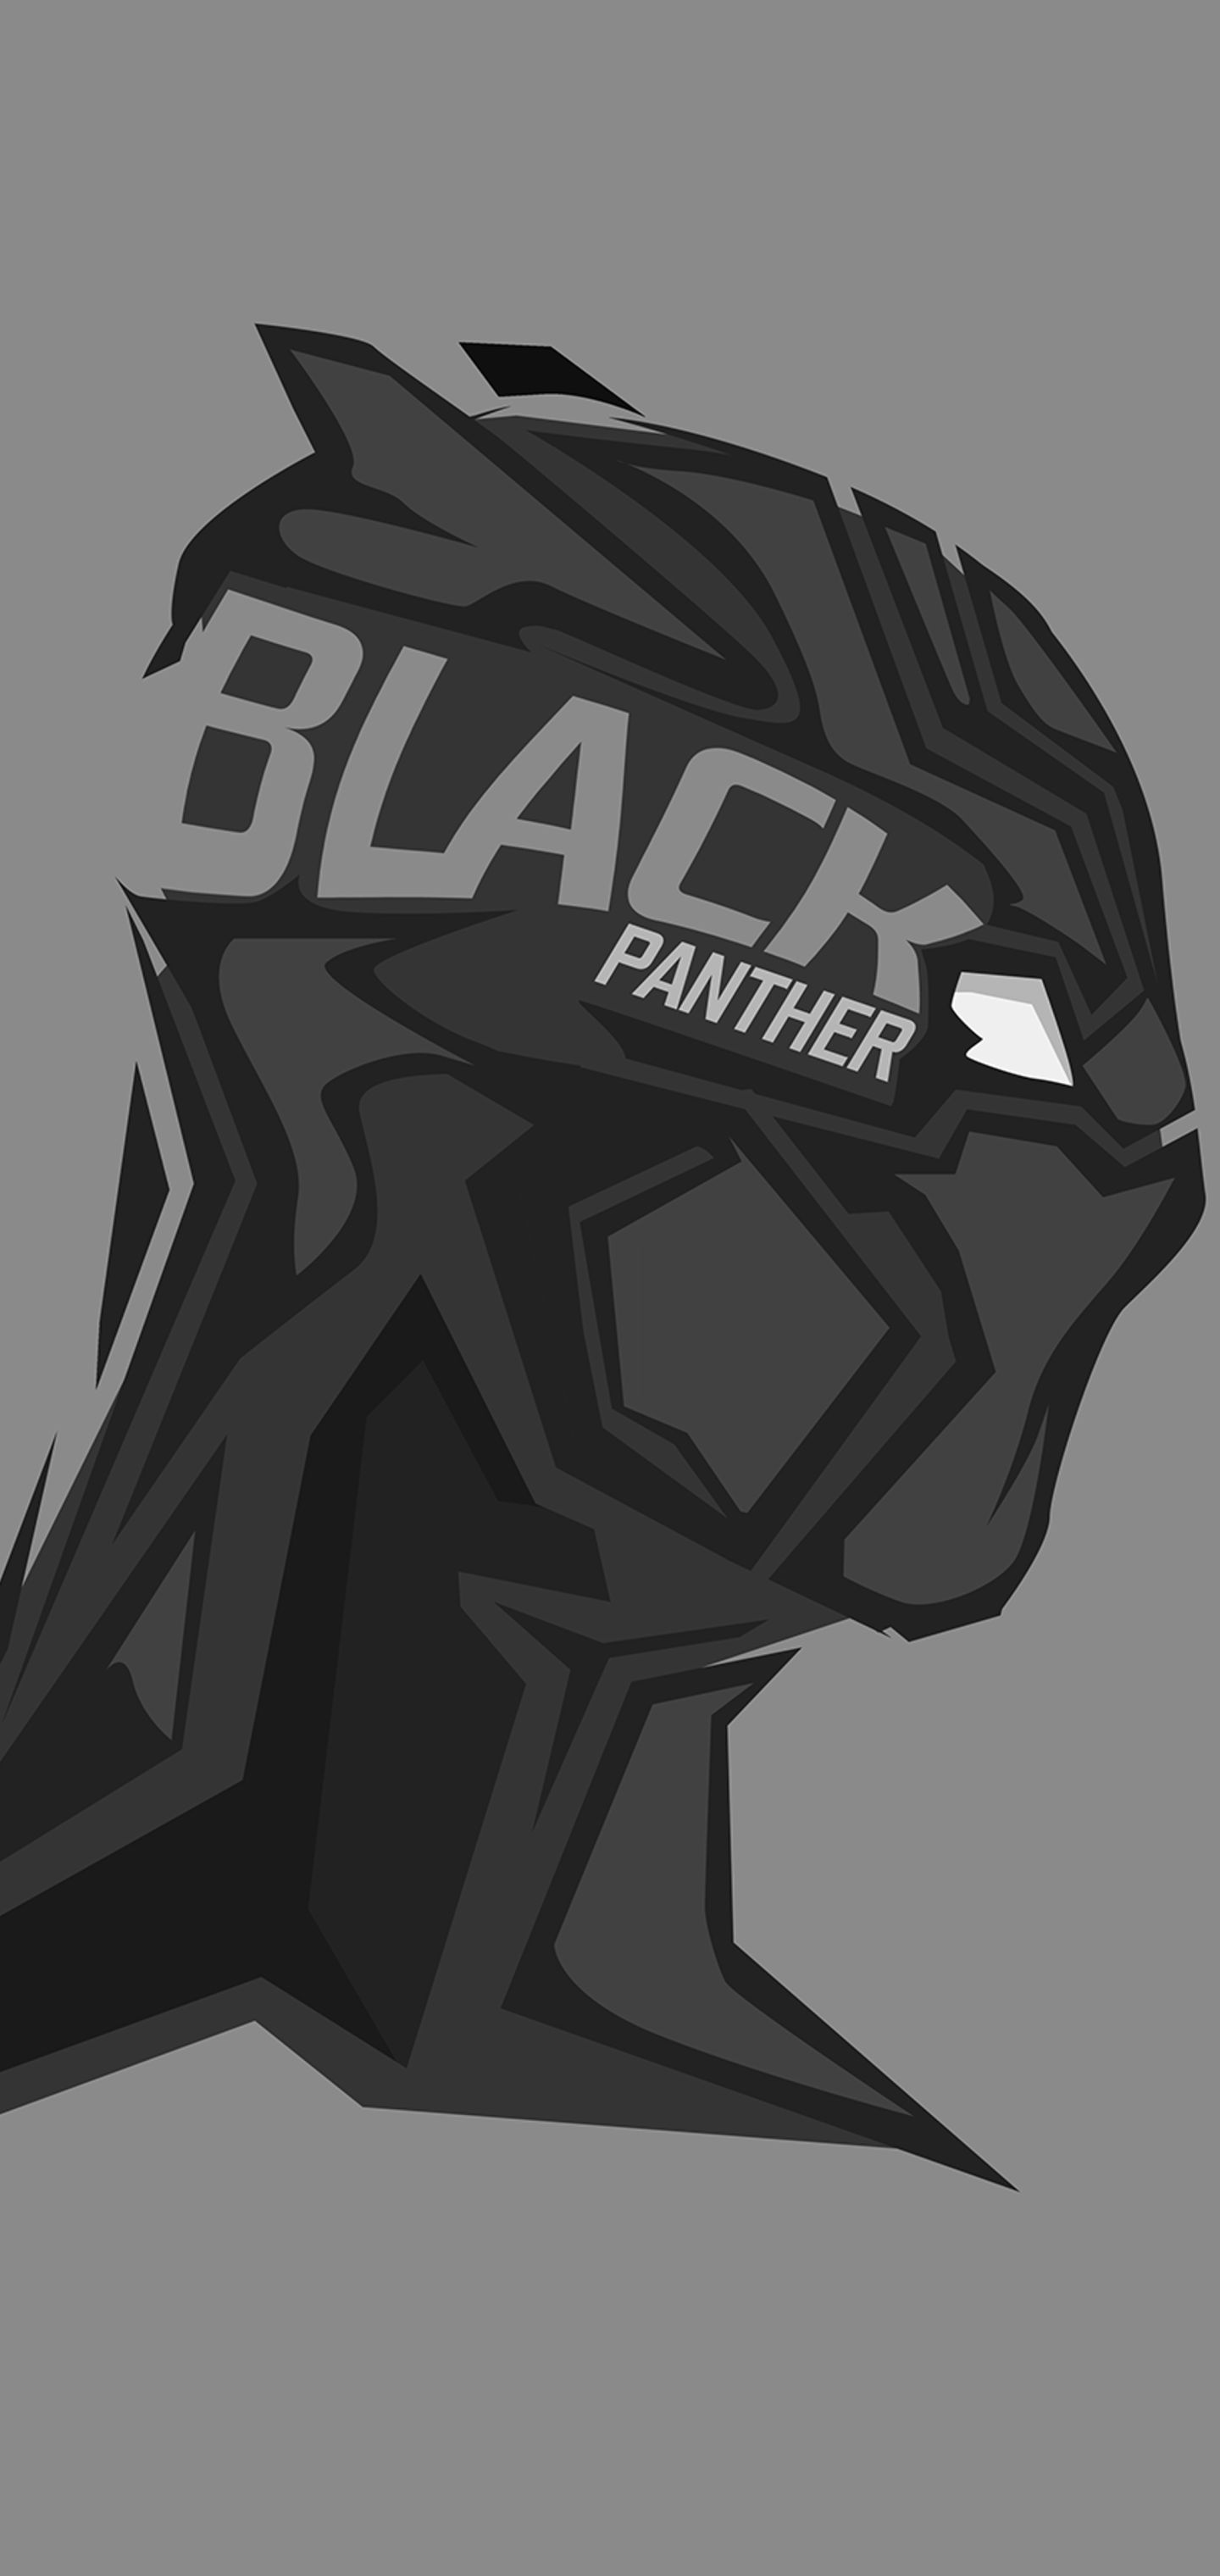 Black Panther Images :: Photos, videos, logos, illustrations and branding  :: Behance